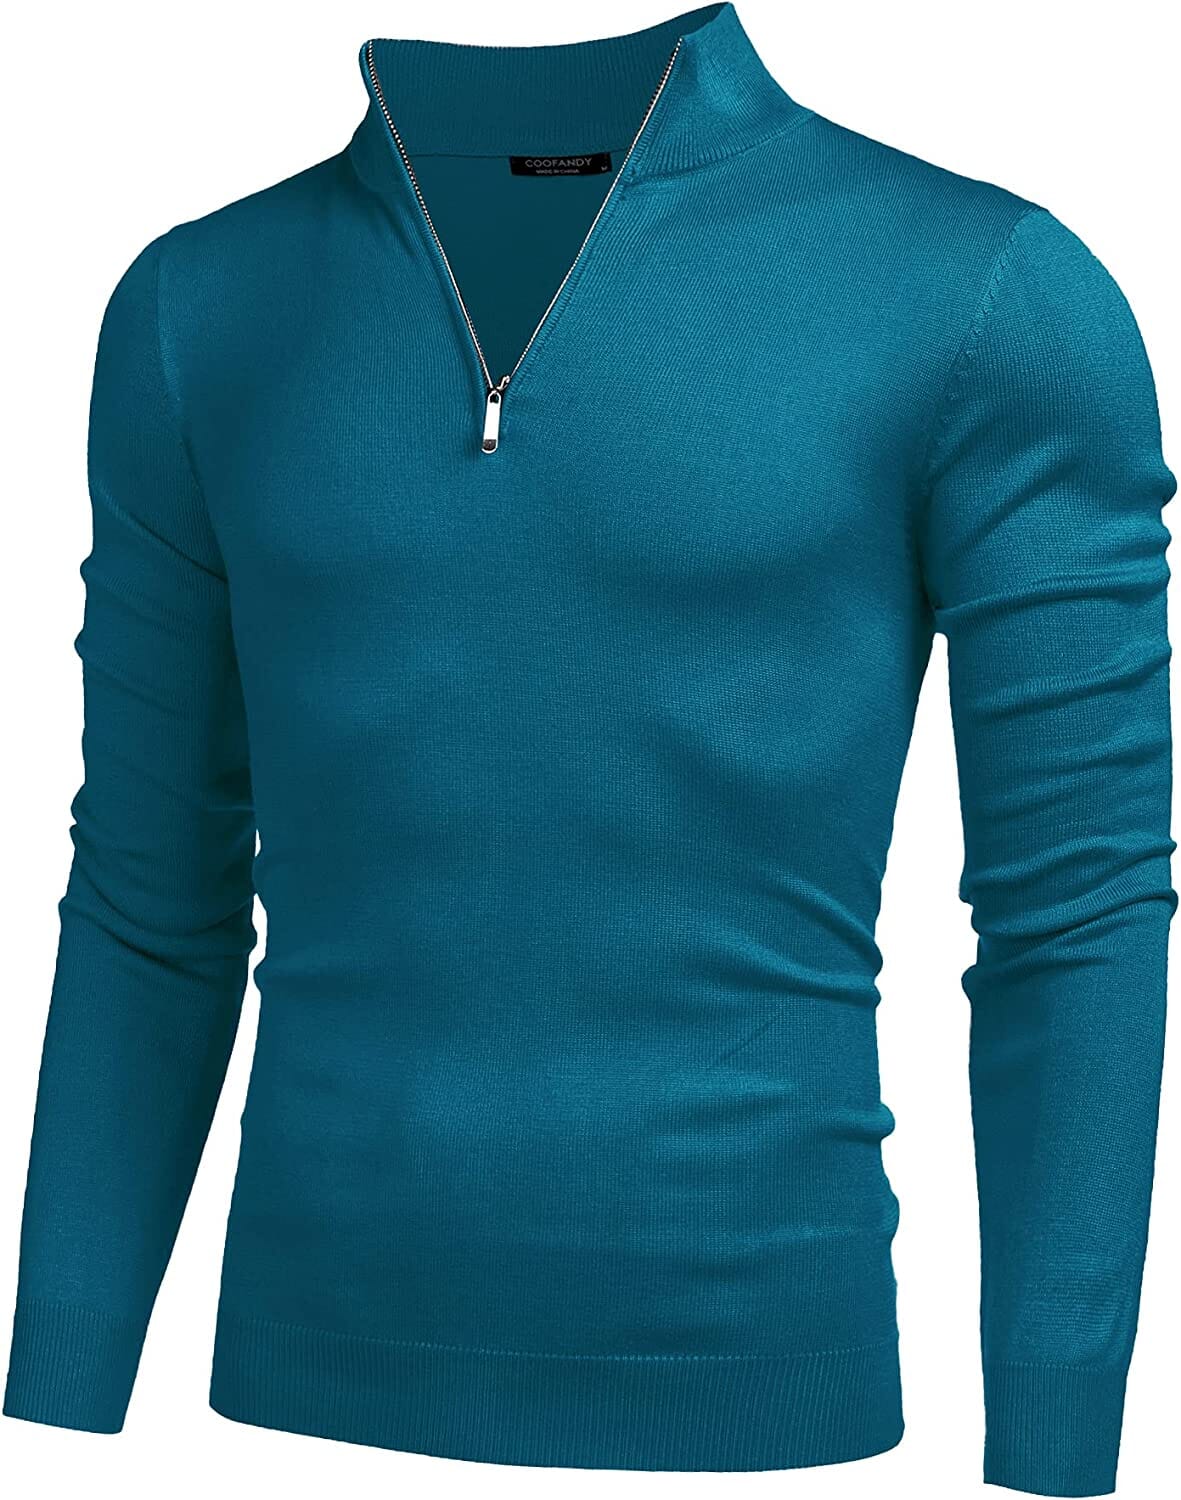 Zip Up Slim Fit Lightweight Pullover Polo Sweater (US Only) Fashion Hoodies & Sweatshirts COOFANDY Store Peacock Blue S 